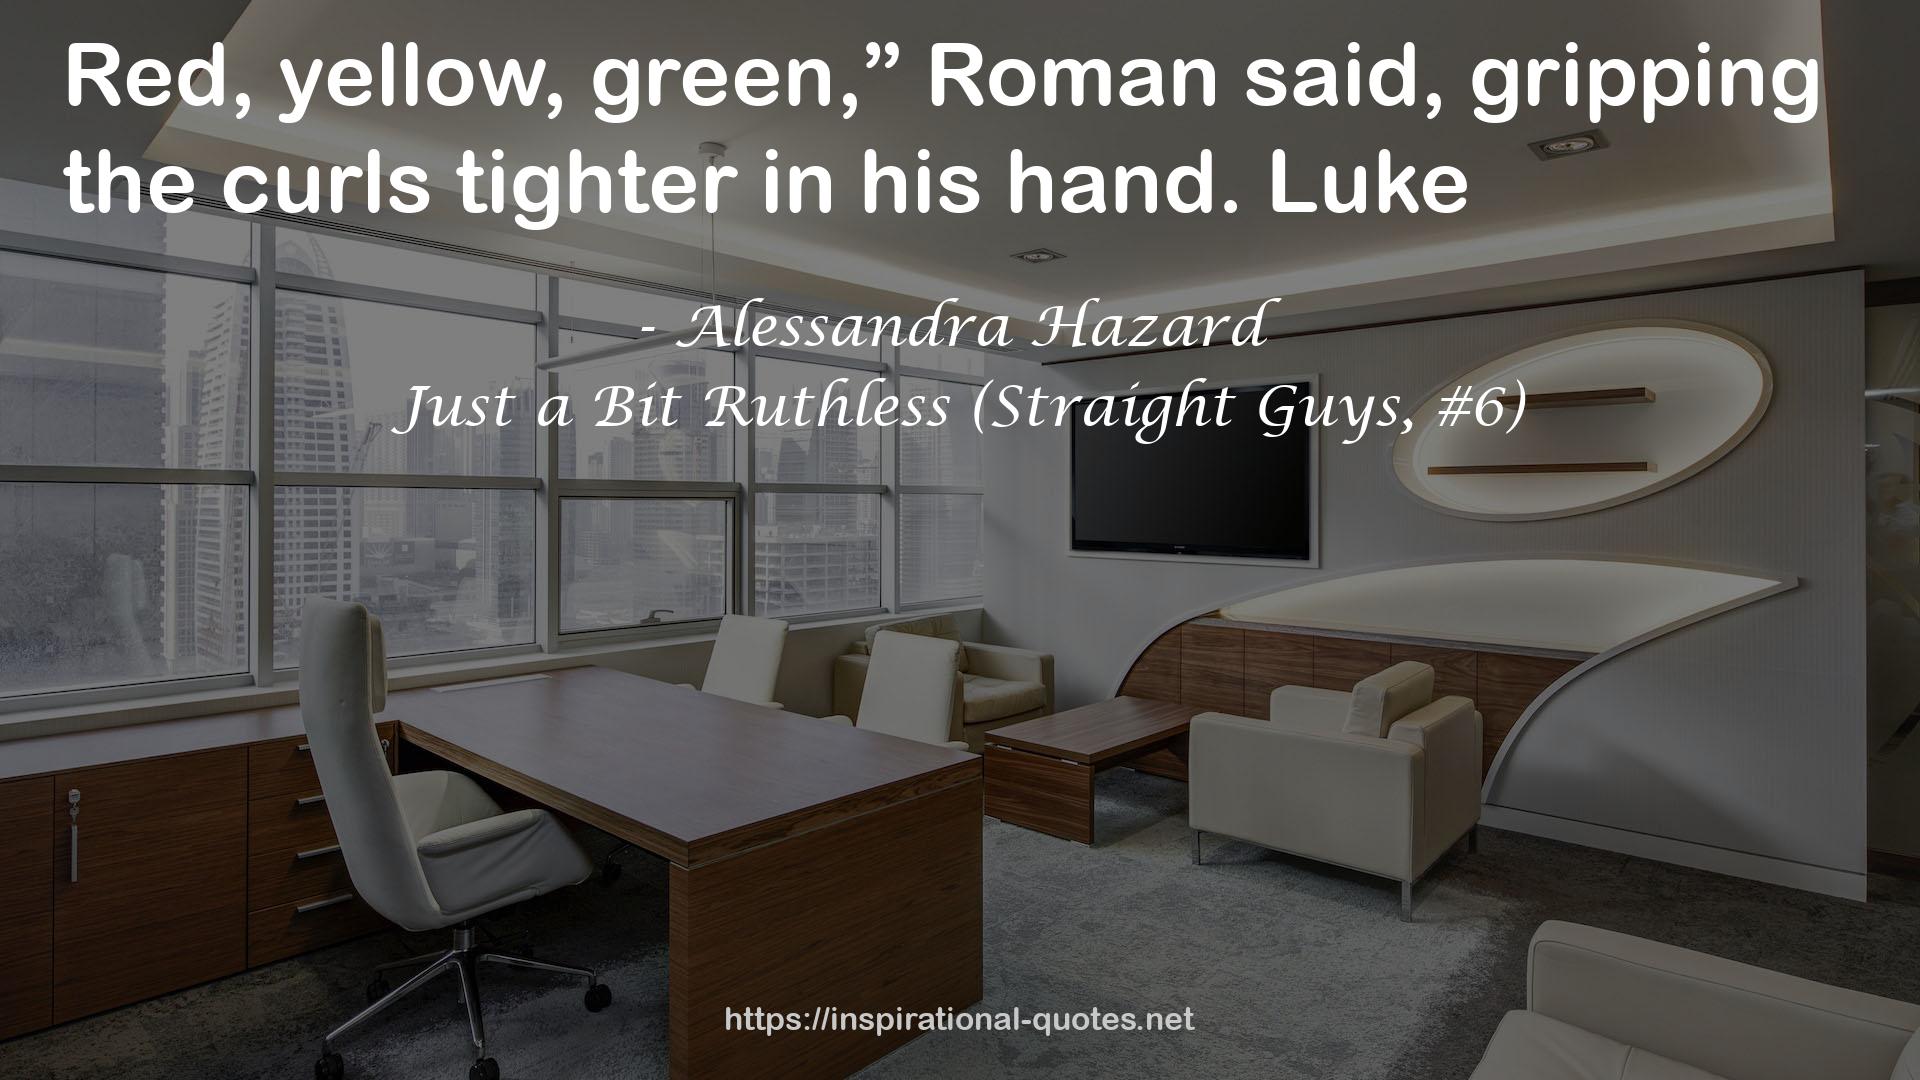 Just a Bit Ruthless (Straight Guys, #6) QUOTES